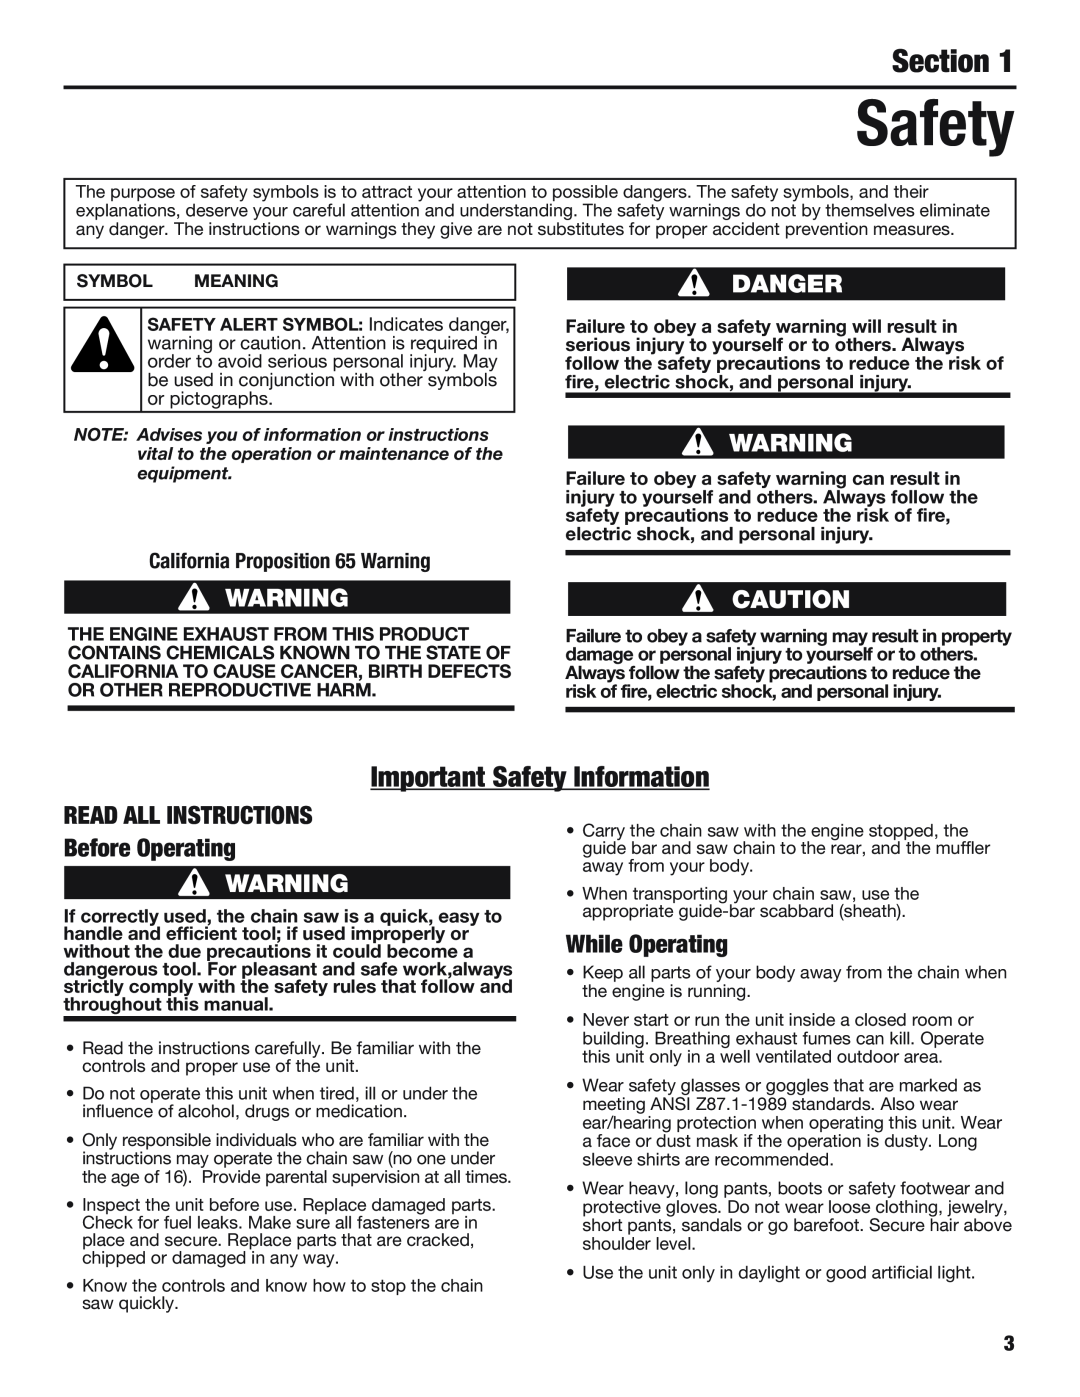 Cub Cadet CS5220 manual Section, Important Safety Information, READ ALL INSTRUCTIONS Before Operating, While Operating 